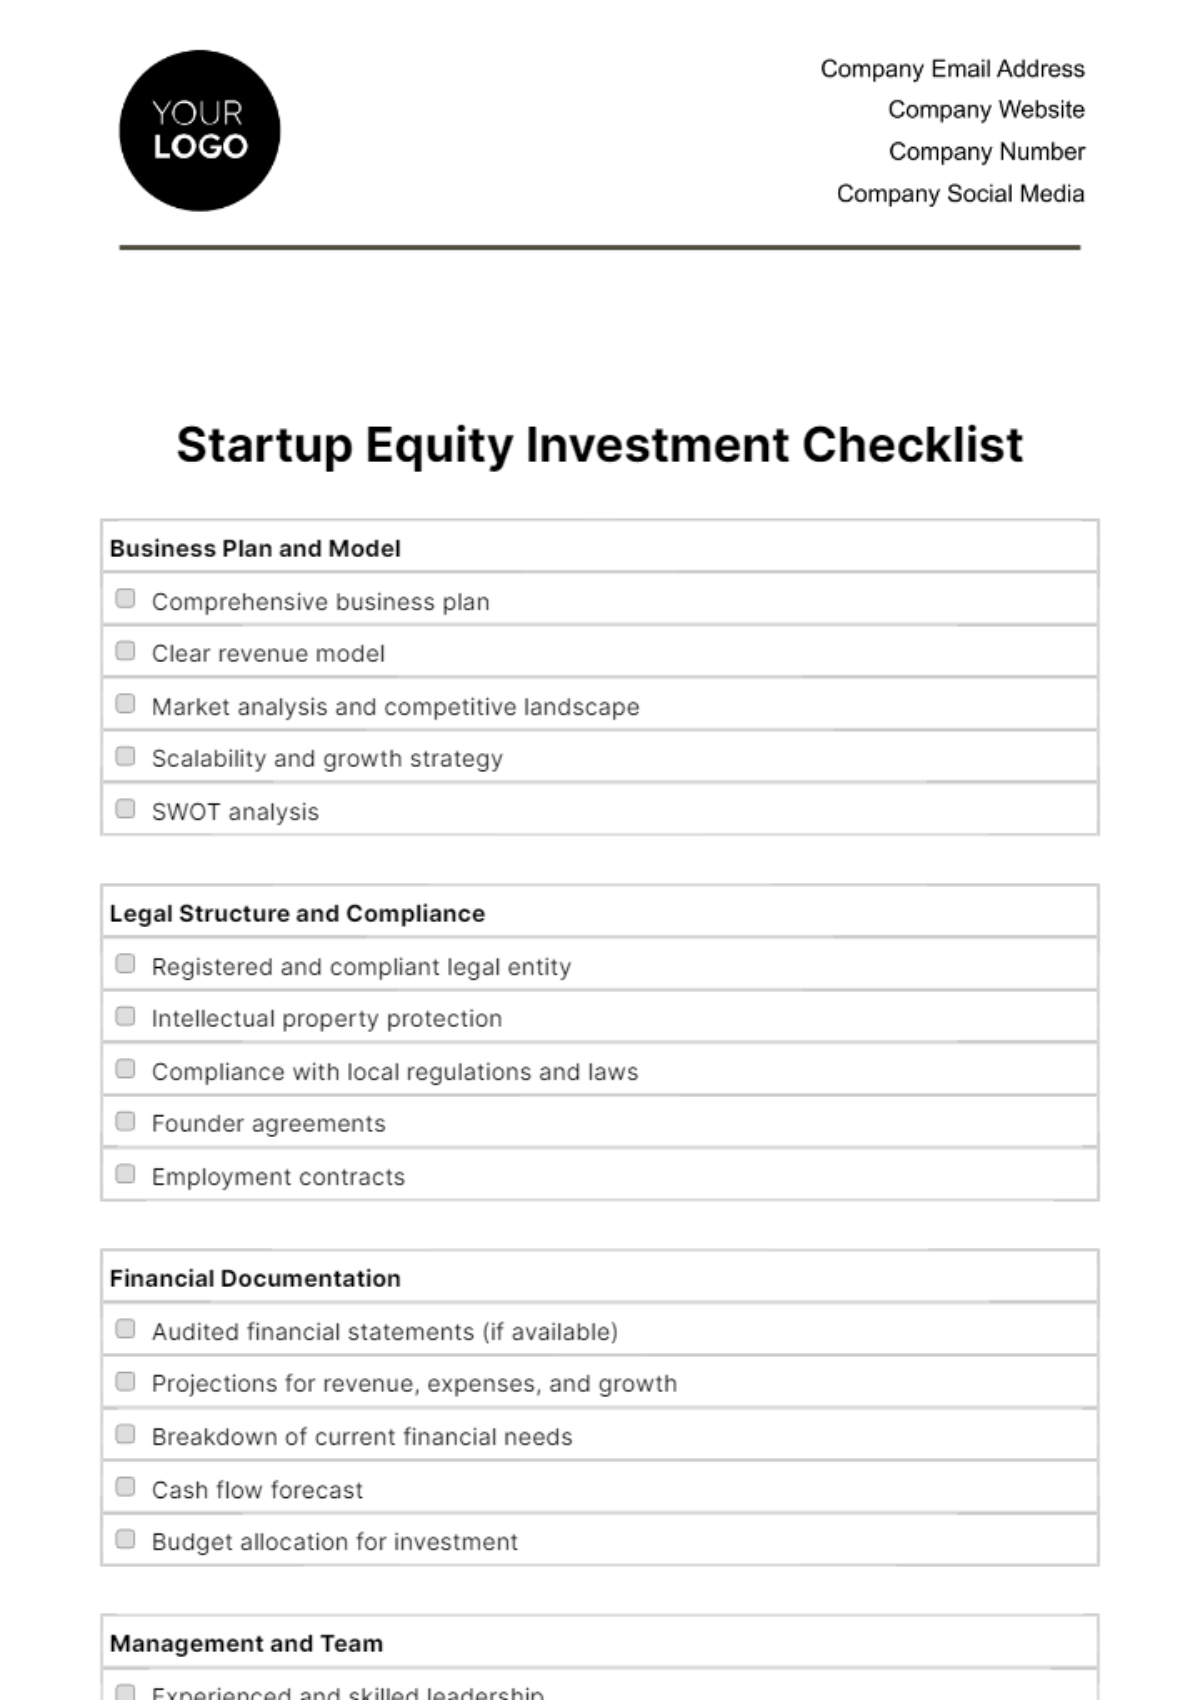 Startup Equity Investment Checklist Template